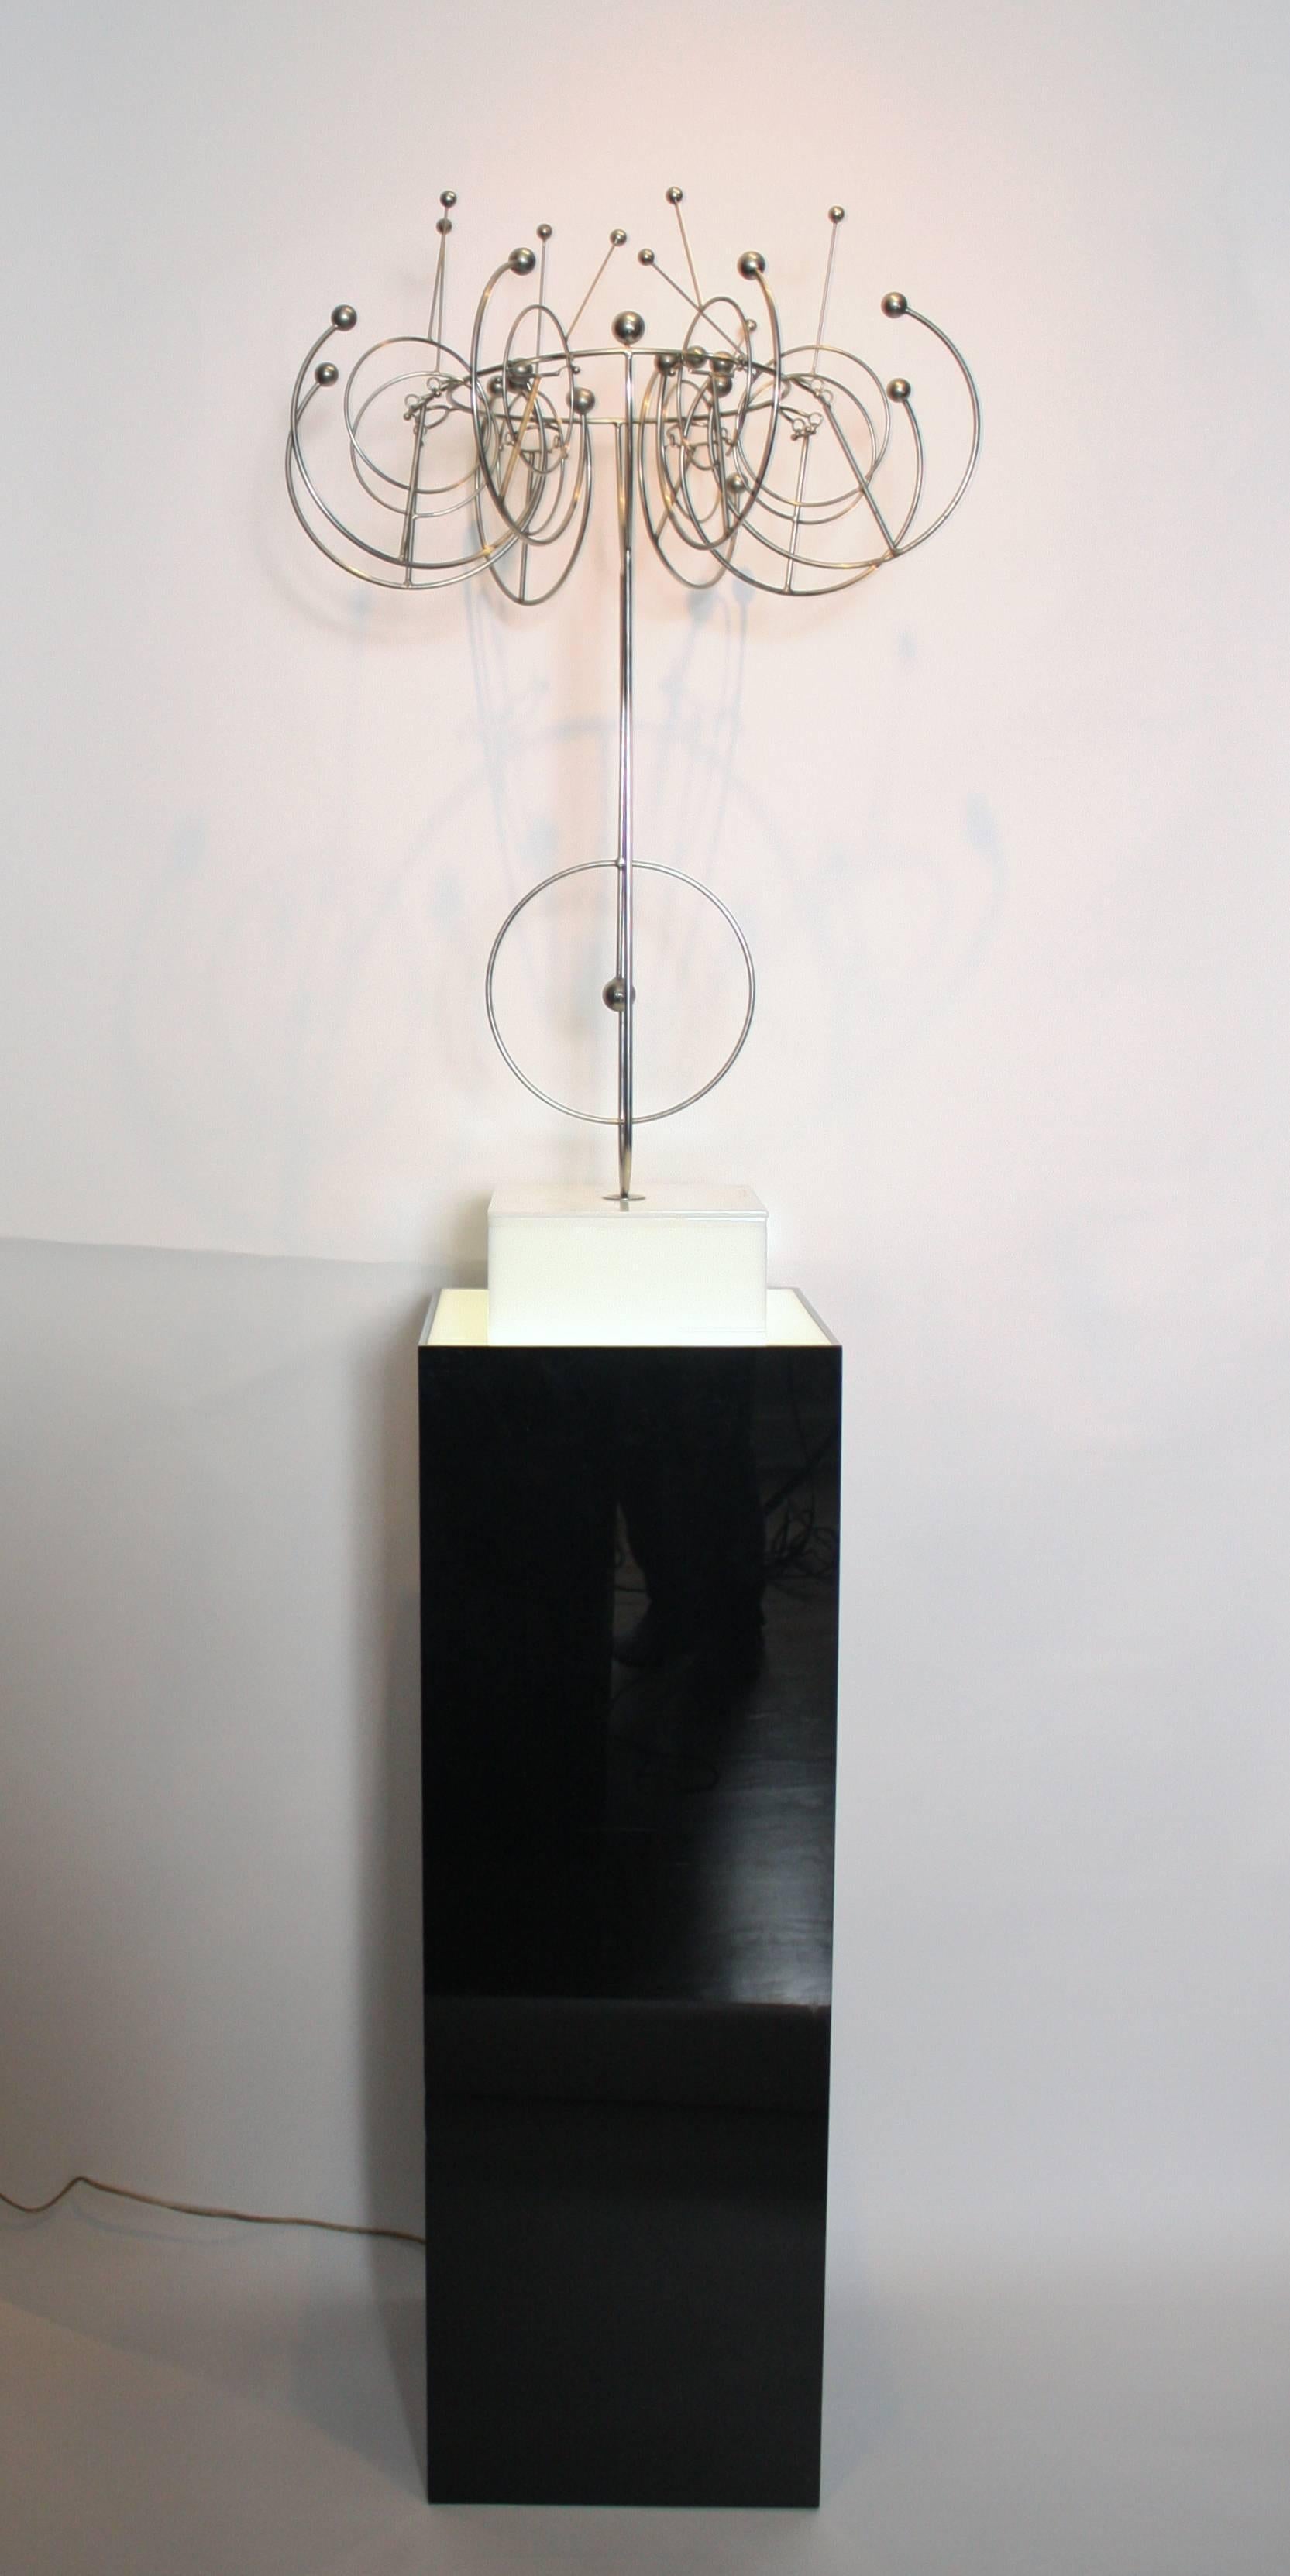 Large Kinetic welded wire sculpture by Industrial designer and sculptor, Joseph Burlini. Signed by the artist and dated (1982) on the white acrylic plinth. Included is the illuminating stand intended for this installation in black high gloss acrylic